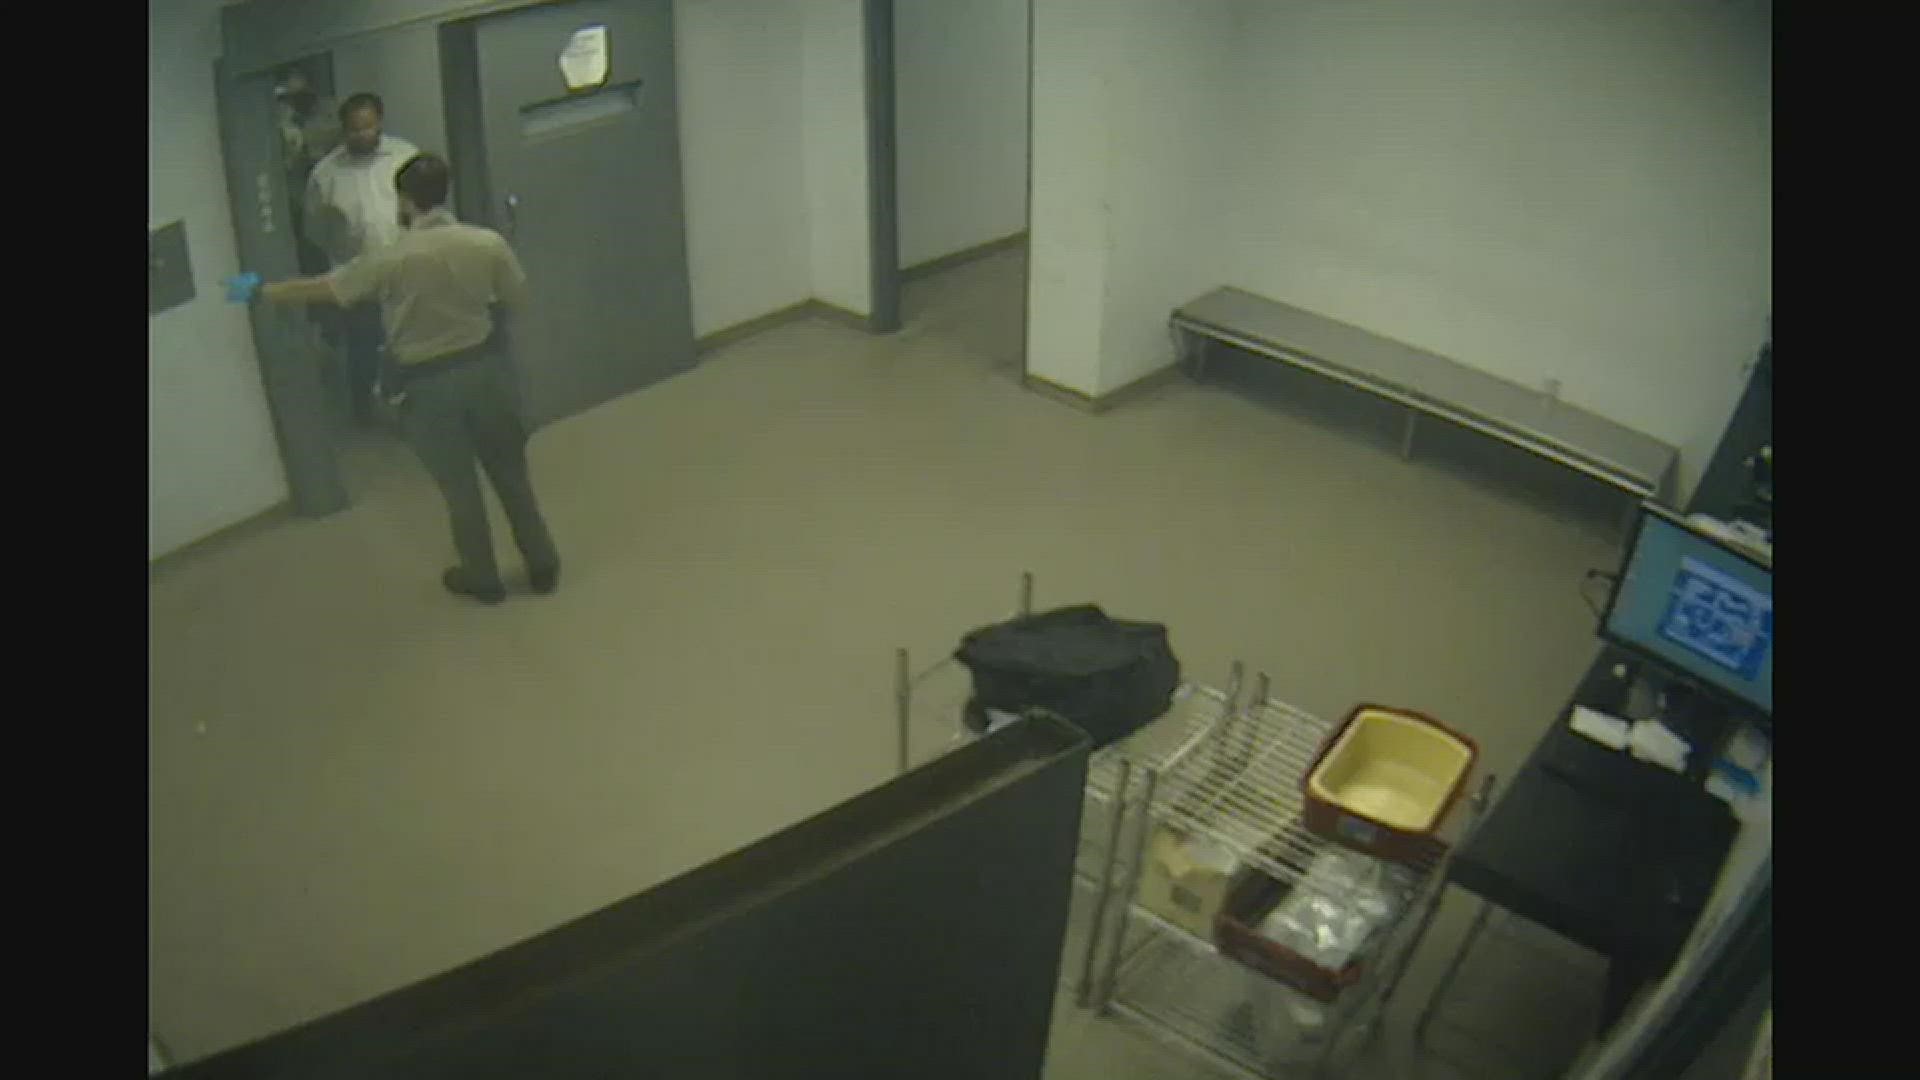 Video shows Josh Duggar being booked into the Washington County Detention Center on Dec. 9 after guilty verdict.